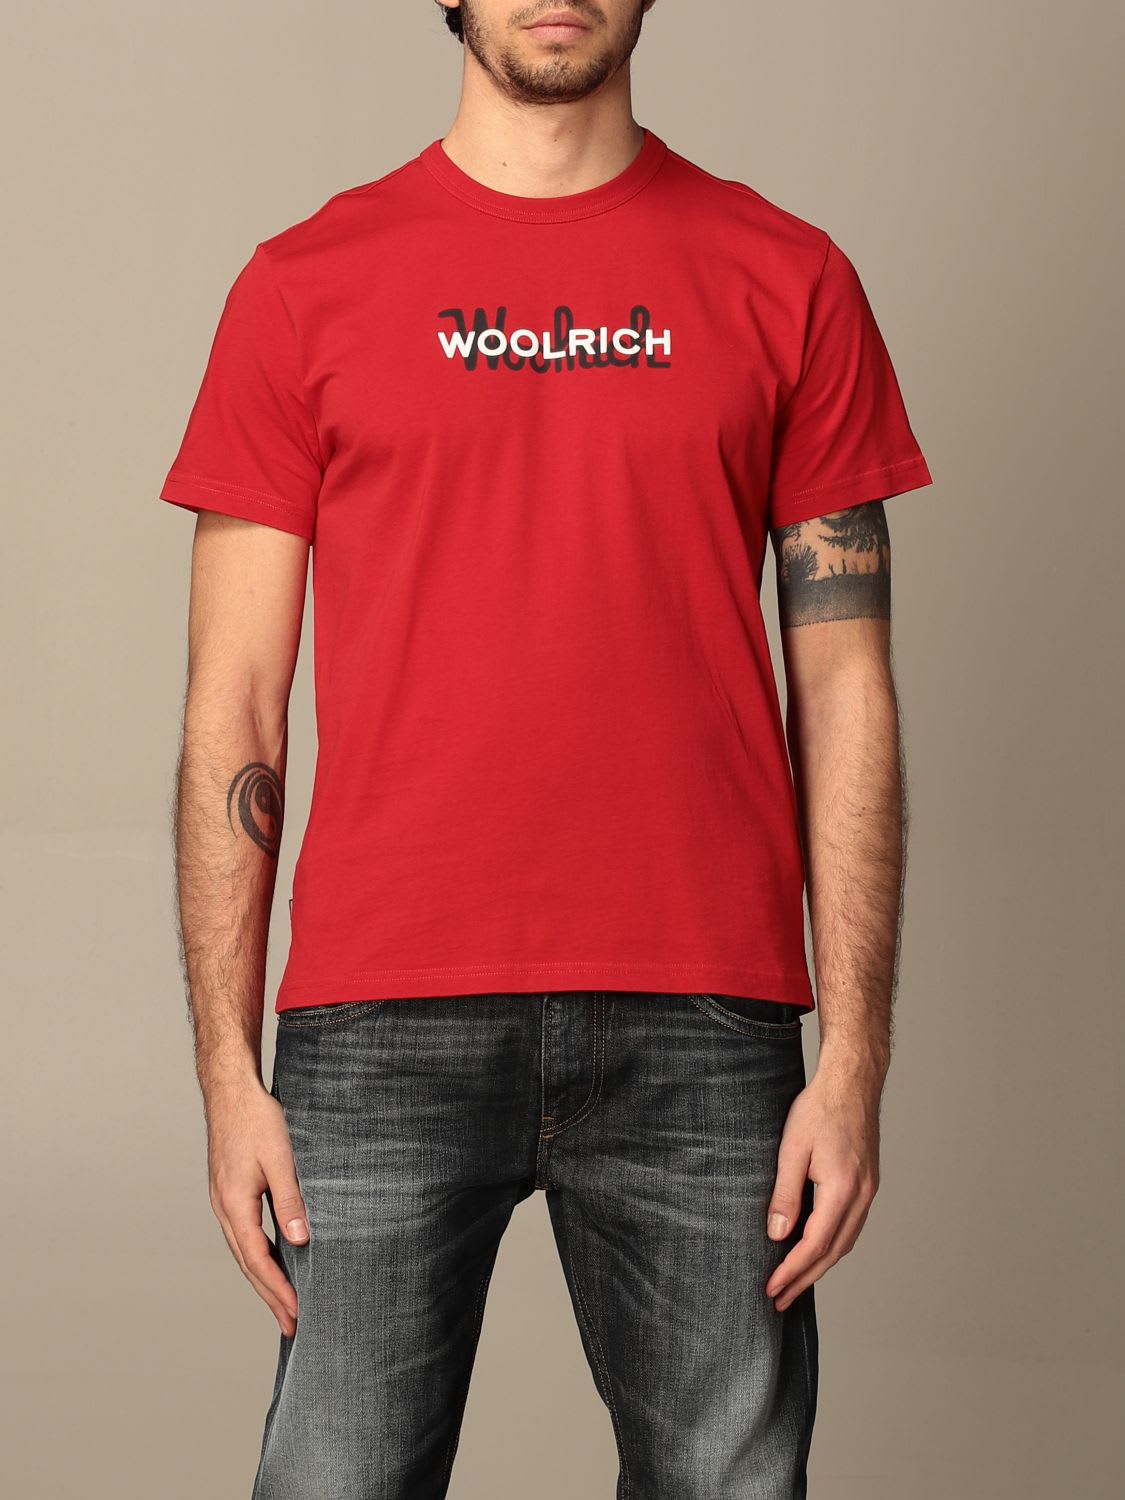 WOOLRICH COTTON T-SHIRT WITH LOGO,WOTE0048MR UT1486 5405